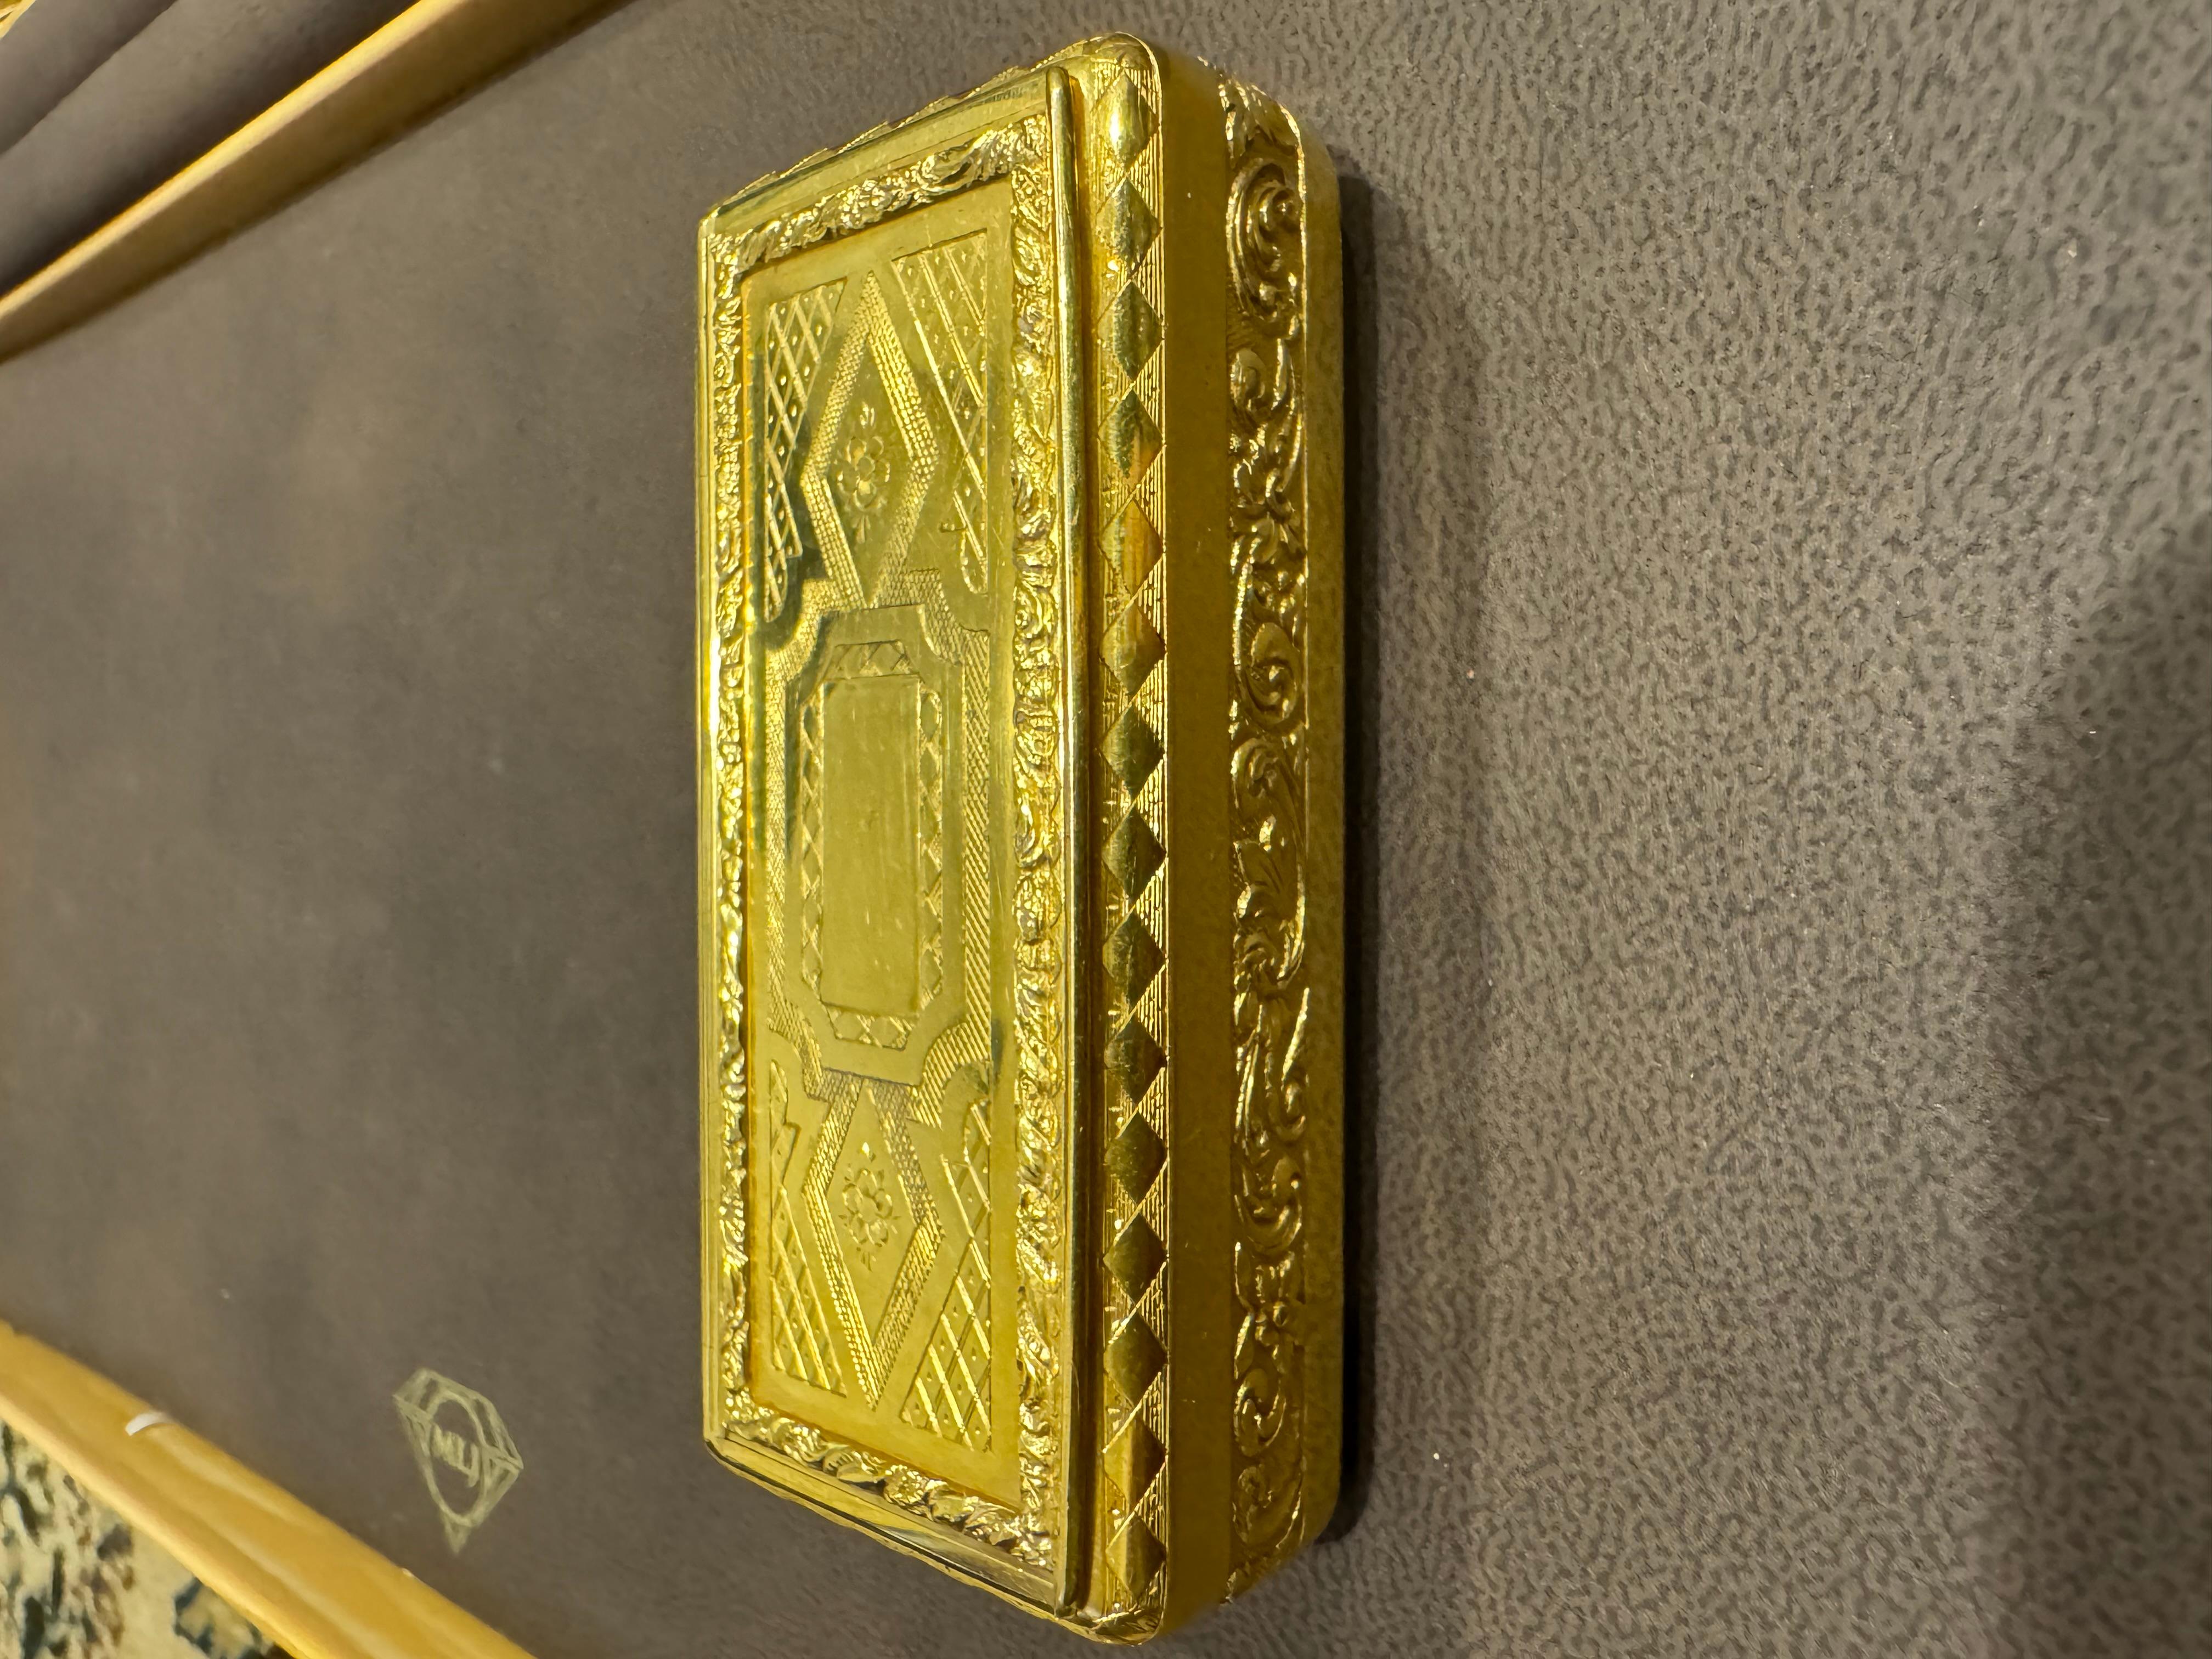 A stunning Retro Box.
 The Elongated box  is made from 18kt solid yellow gold. 
Beautiful artistic workmanship all over the box with different patterns.
set in 18k gold

In excellent condition, no damage.
Size
Height 1 inch
Length 3.2 inches
Width